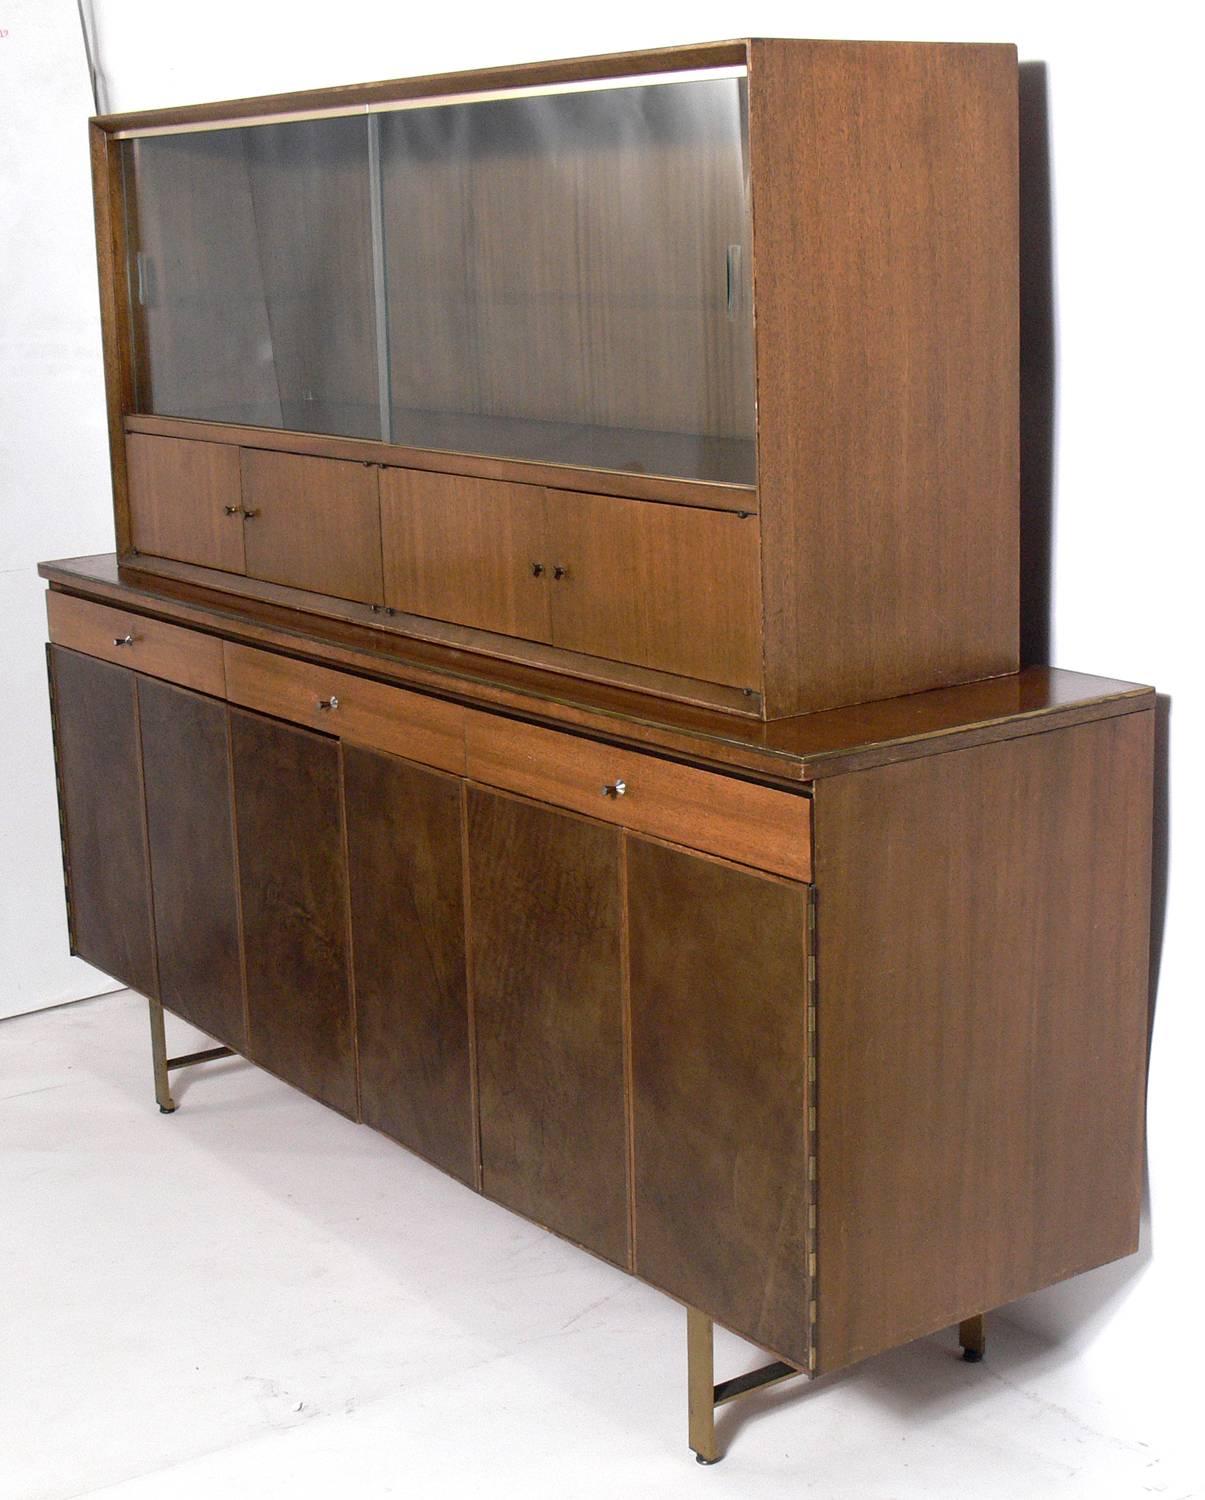 Modern leather front credenza by Paul McCobb for Calvin, American, circa 1950s. This piece is currently being refinished and can be completed in your choice of color. The price noted below includes refinishing in your choice of color. This piece